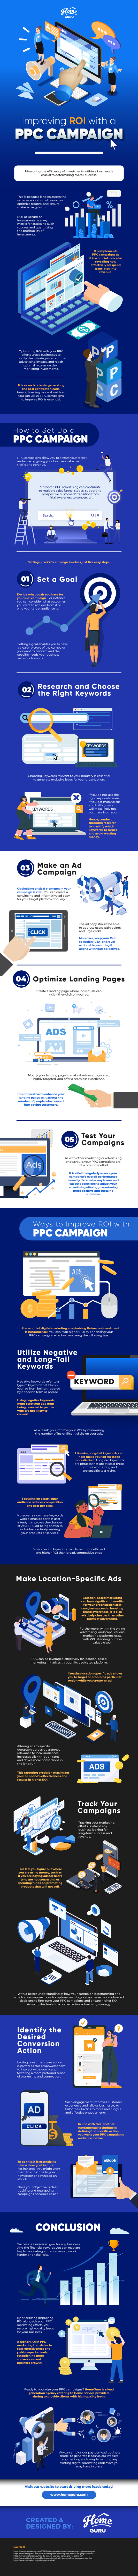 Improving-ROI-with-a-PPC-Campaign-Infographic